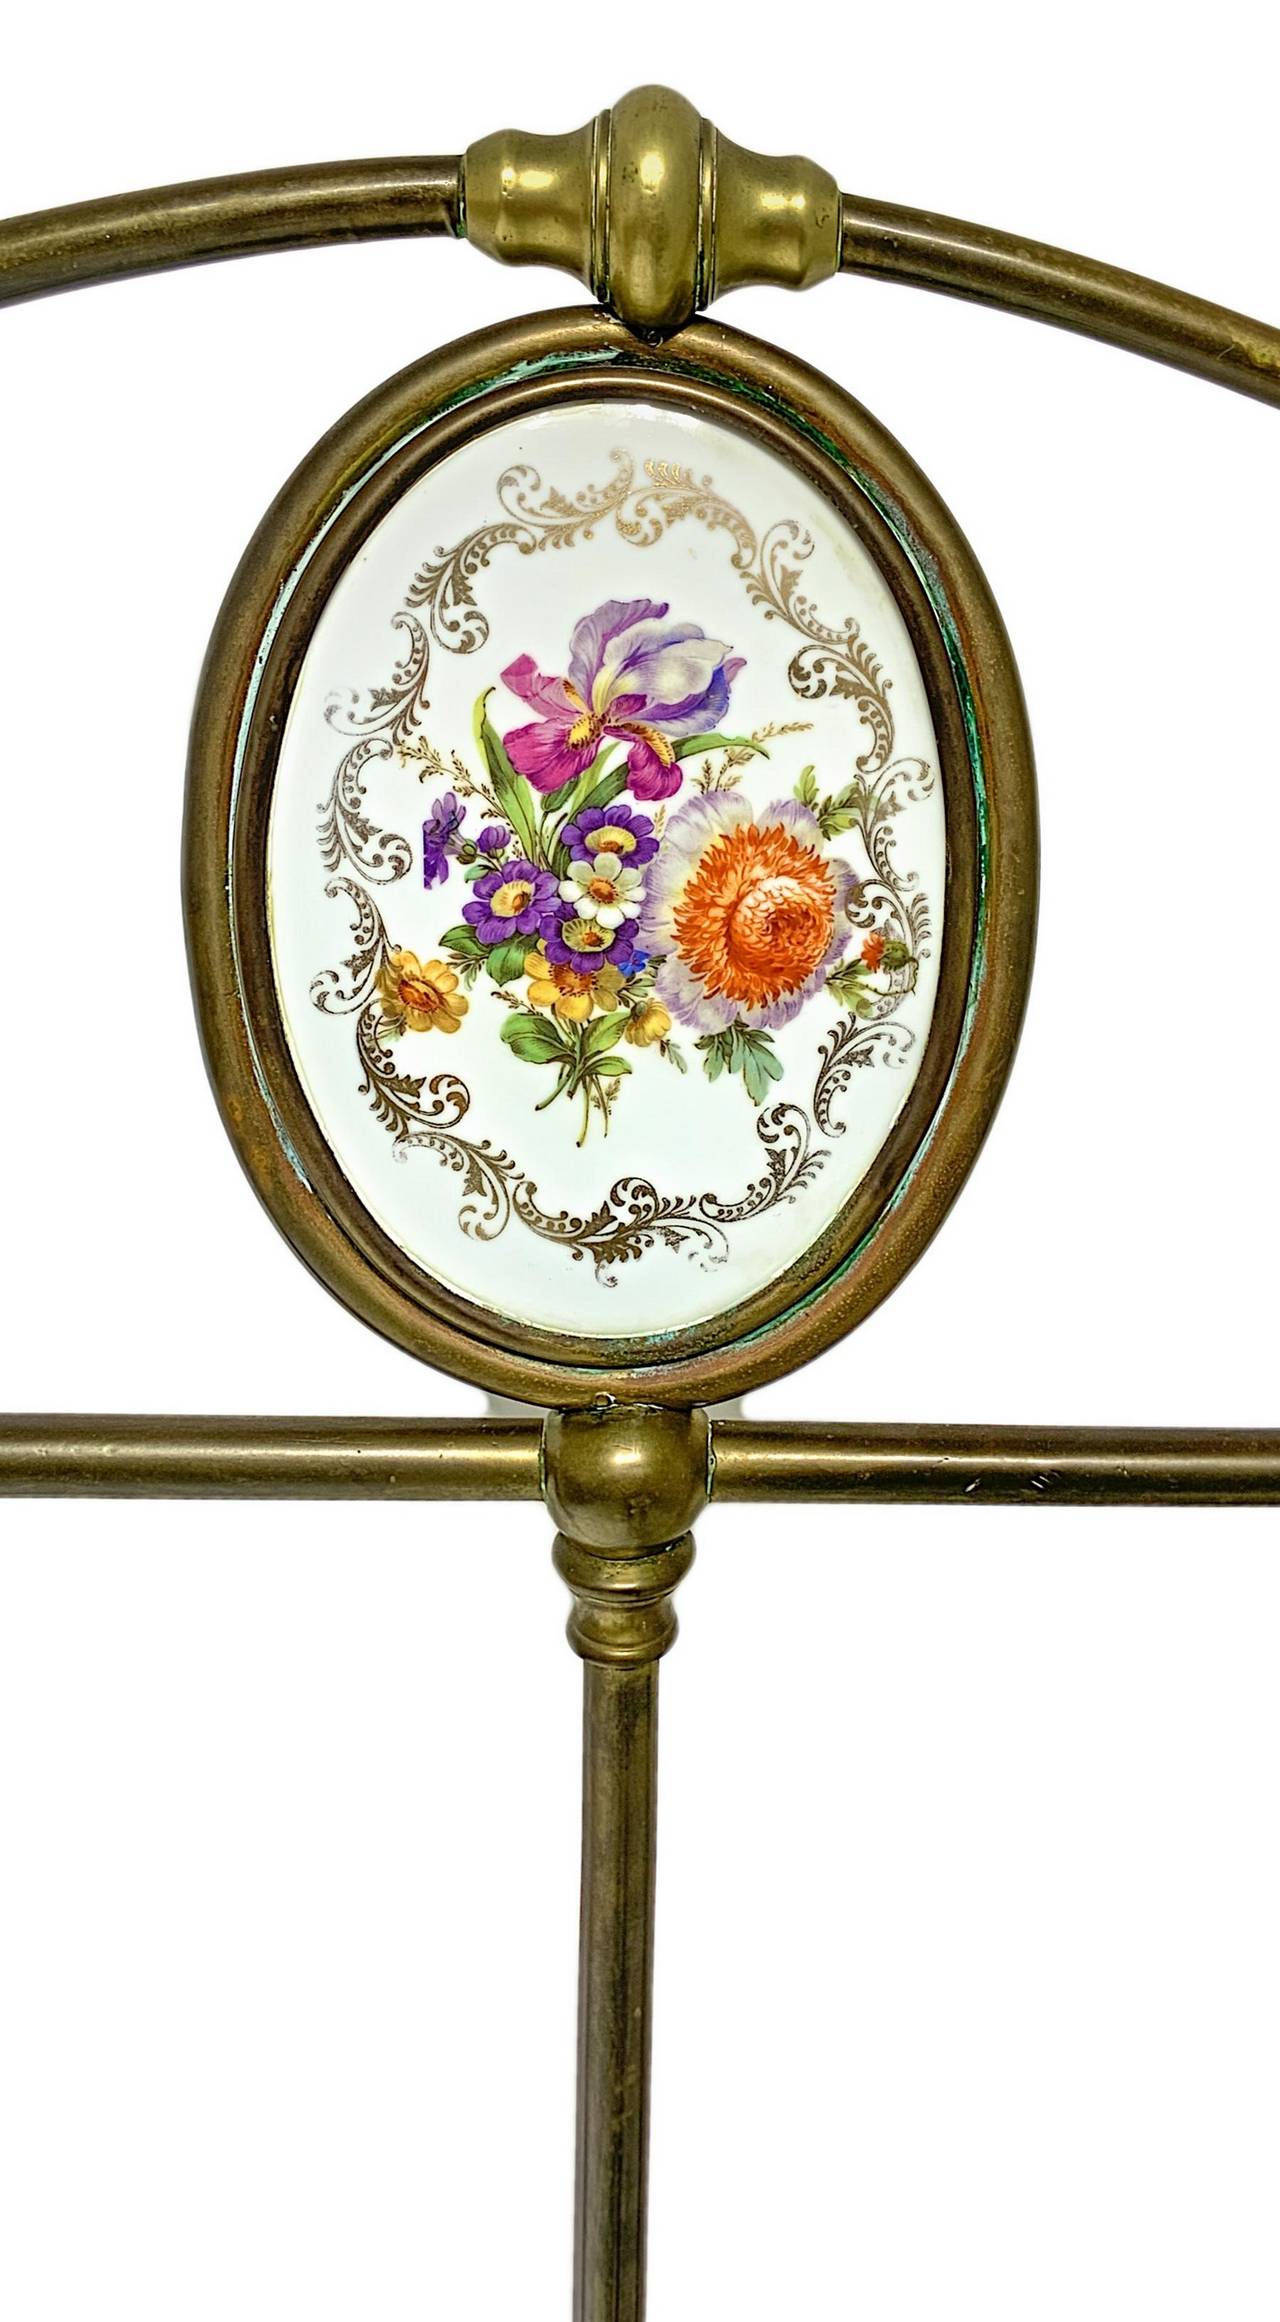 Elegant brass bed frame from the nineteenth century, with porcelain medallion on headboard and footb - Image 5 of 8